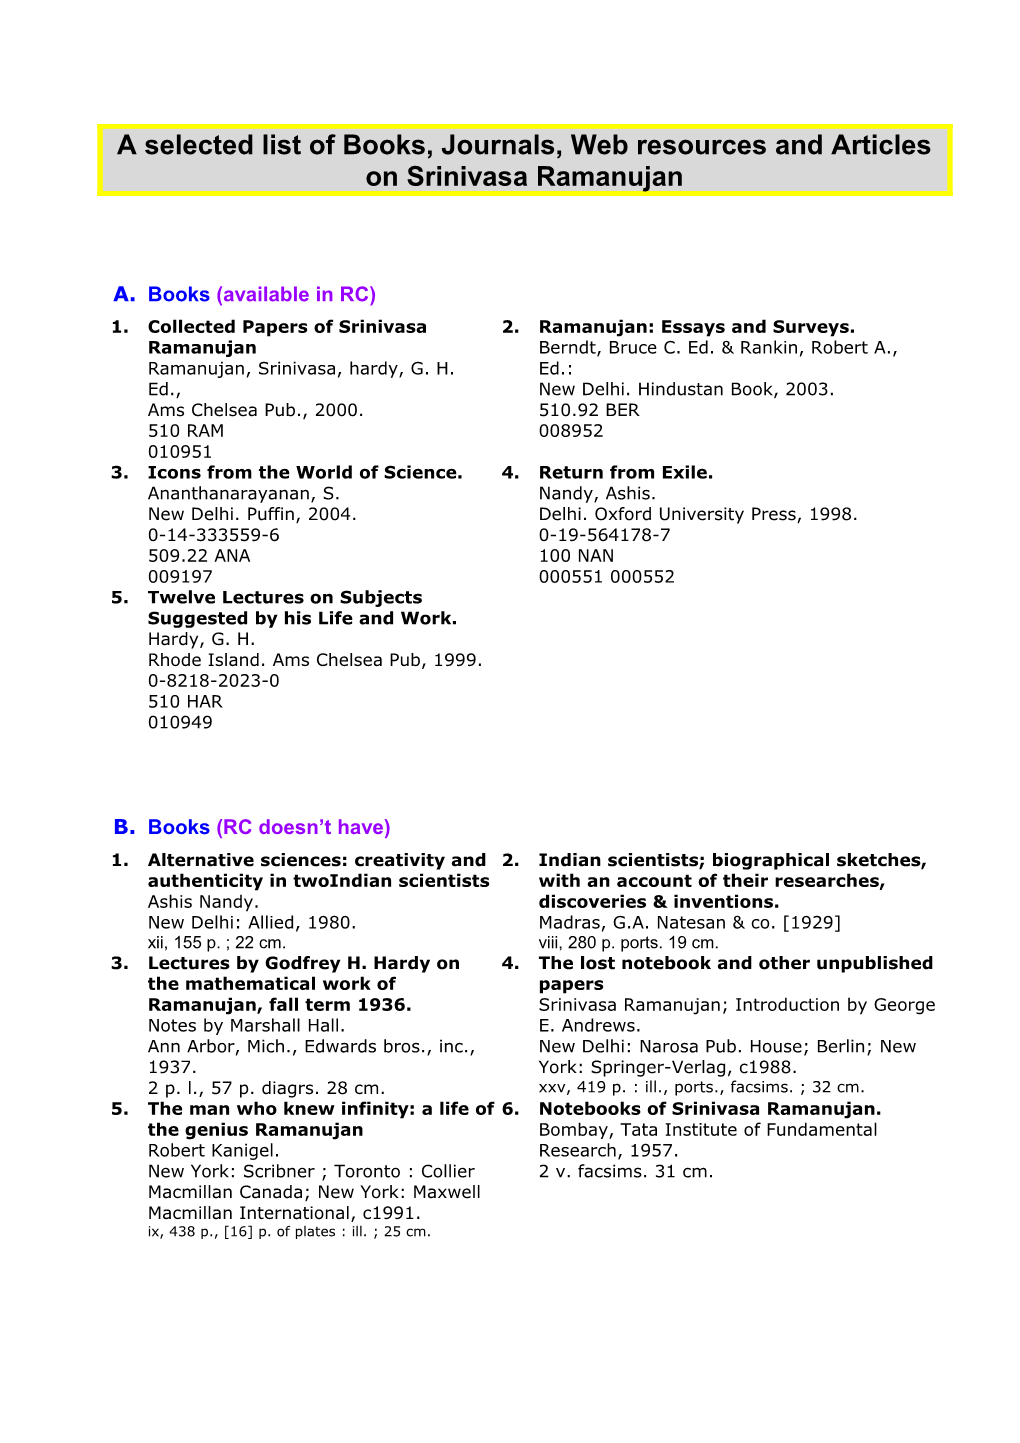 A Selected List of Books, Journals, Web Resources and Articles on Srinivasa Ramanujan